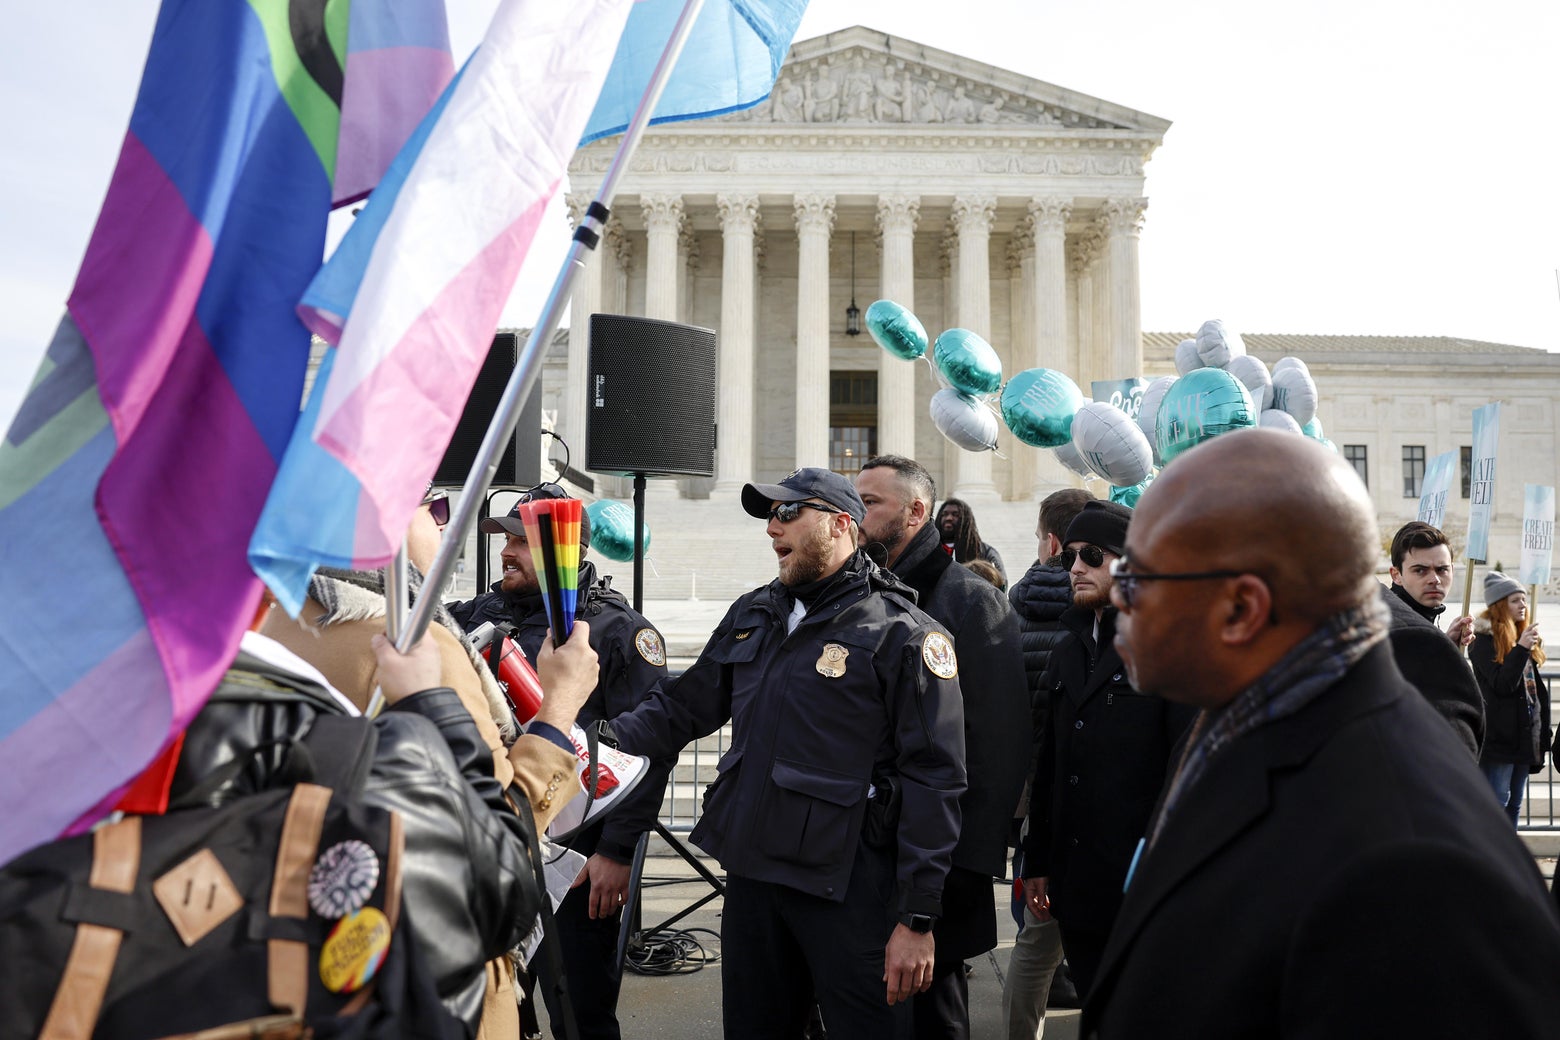 The gay rights case is not about free speech.